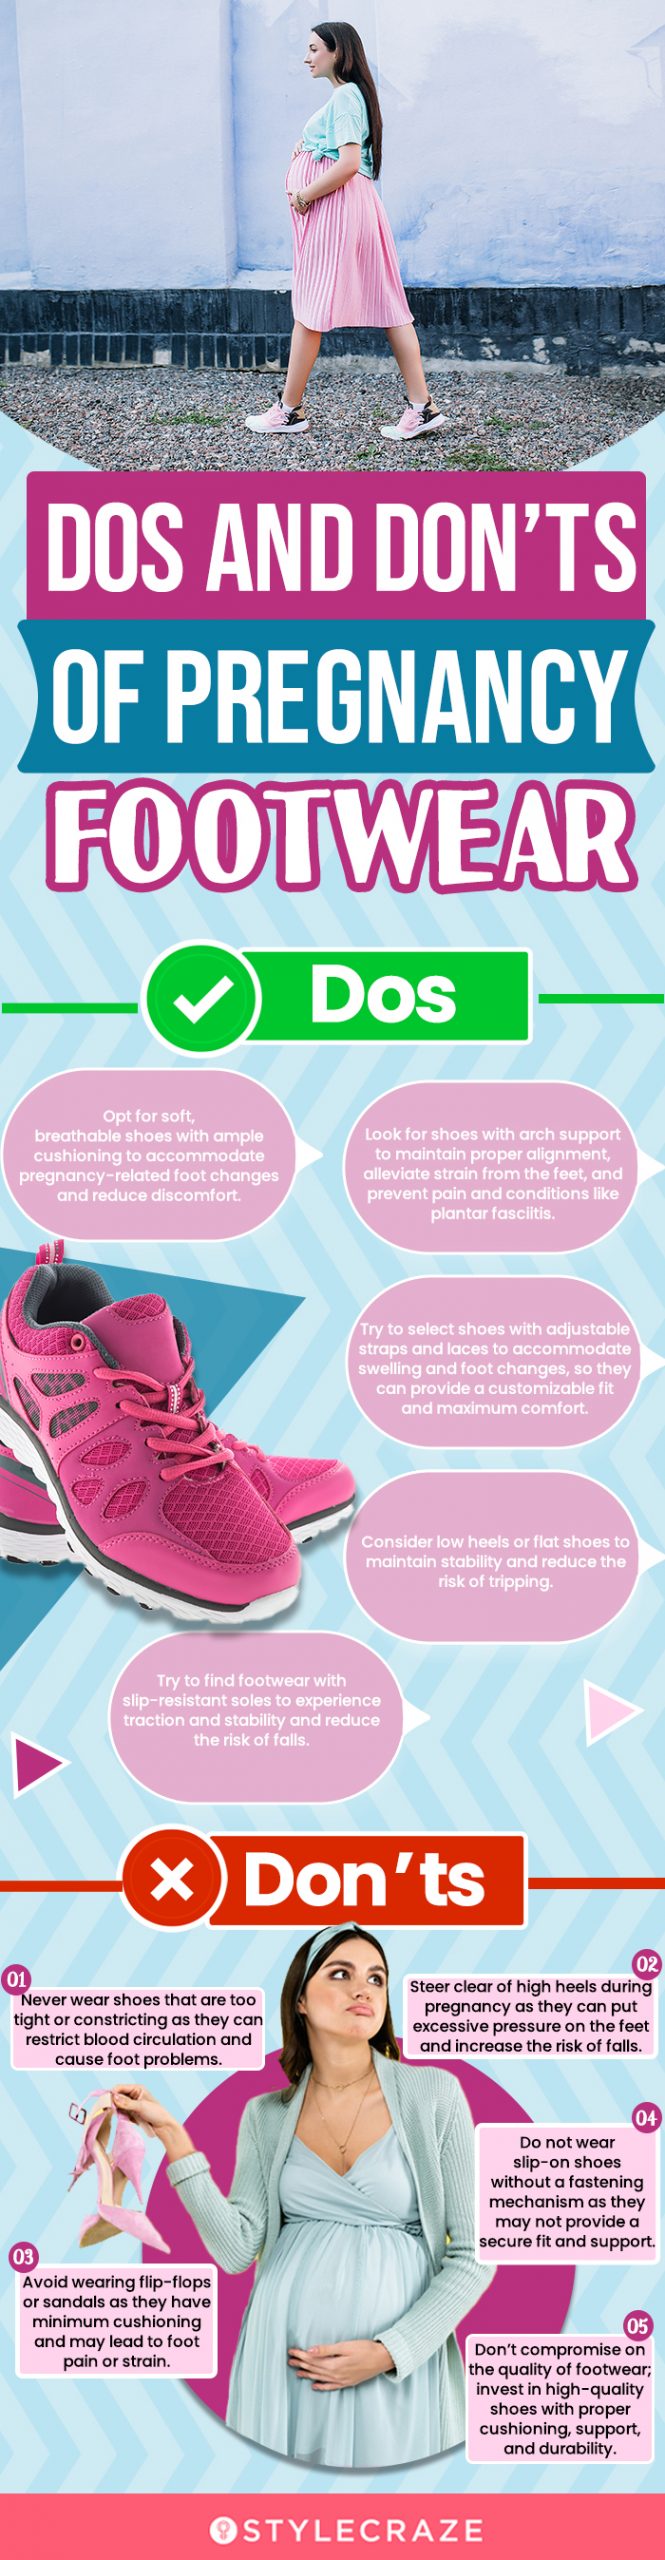 Dos And Don’ts Of Pregnancy Footwear (infographic)